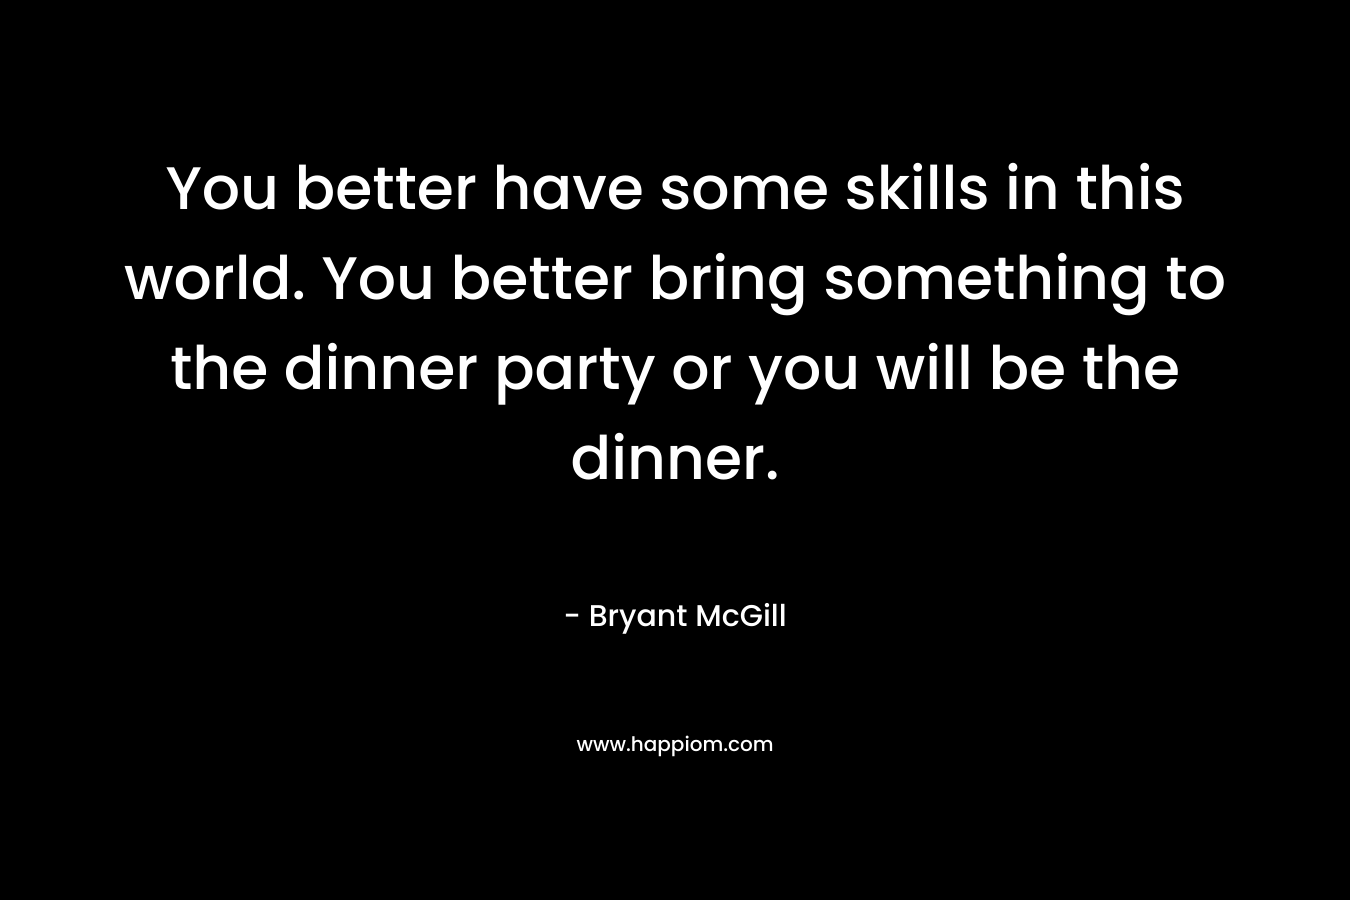 You better have some skills in this world. You better bring something to the dinner party or you will be the dinner. – Bryant McGill